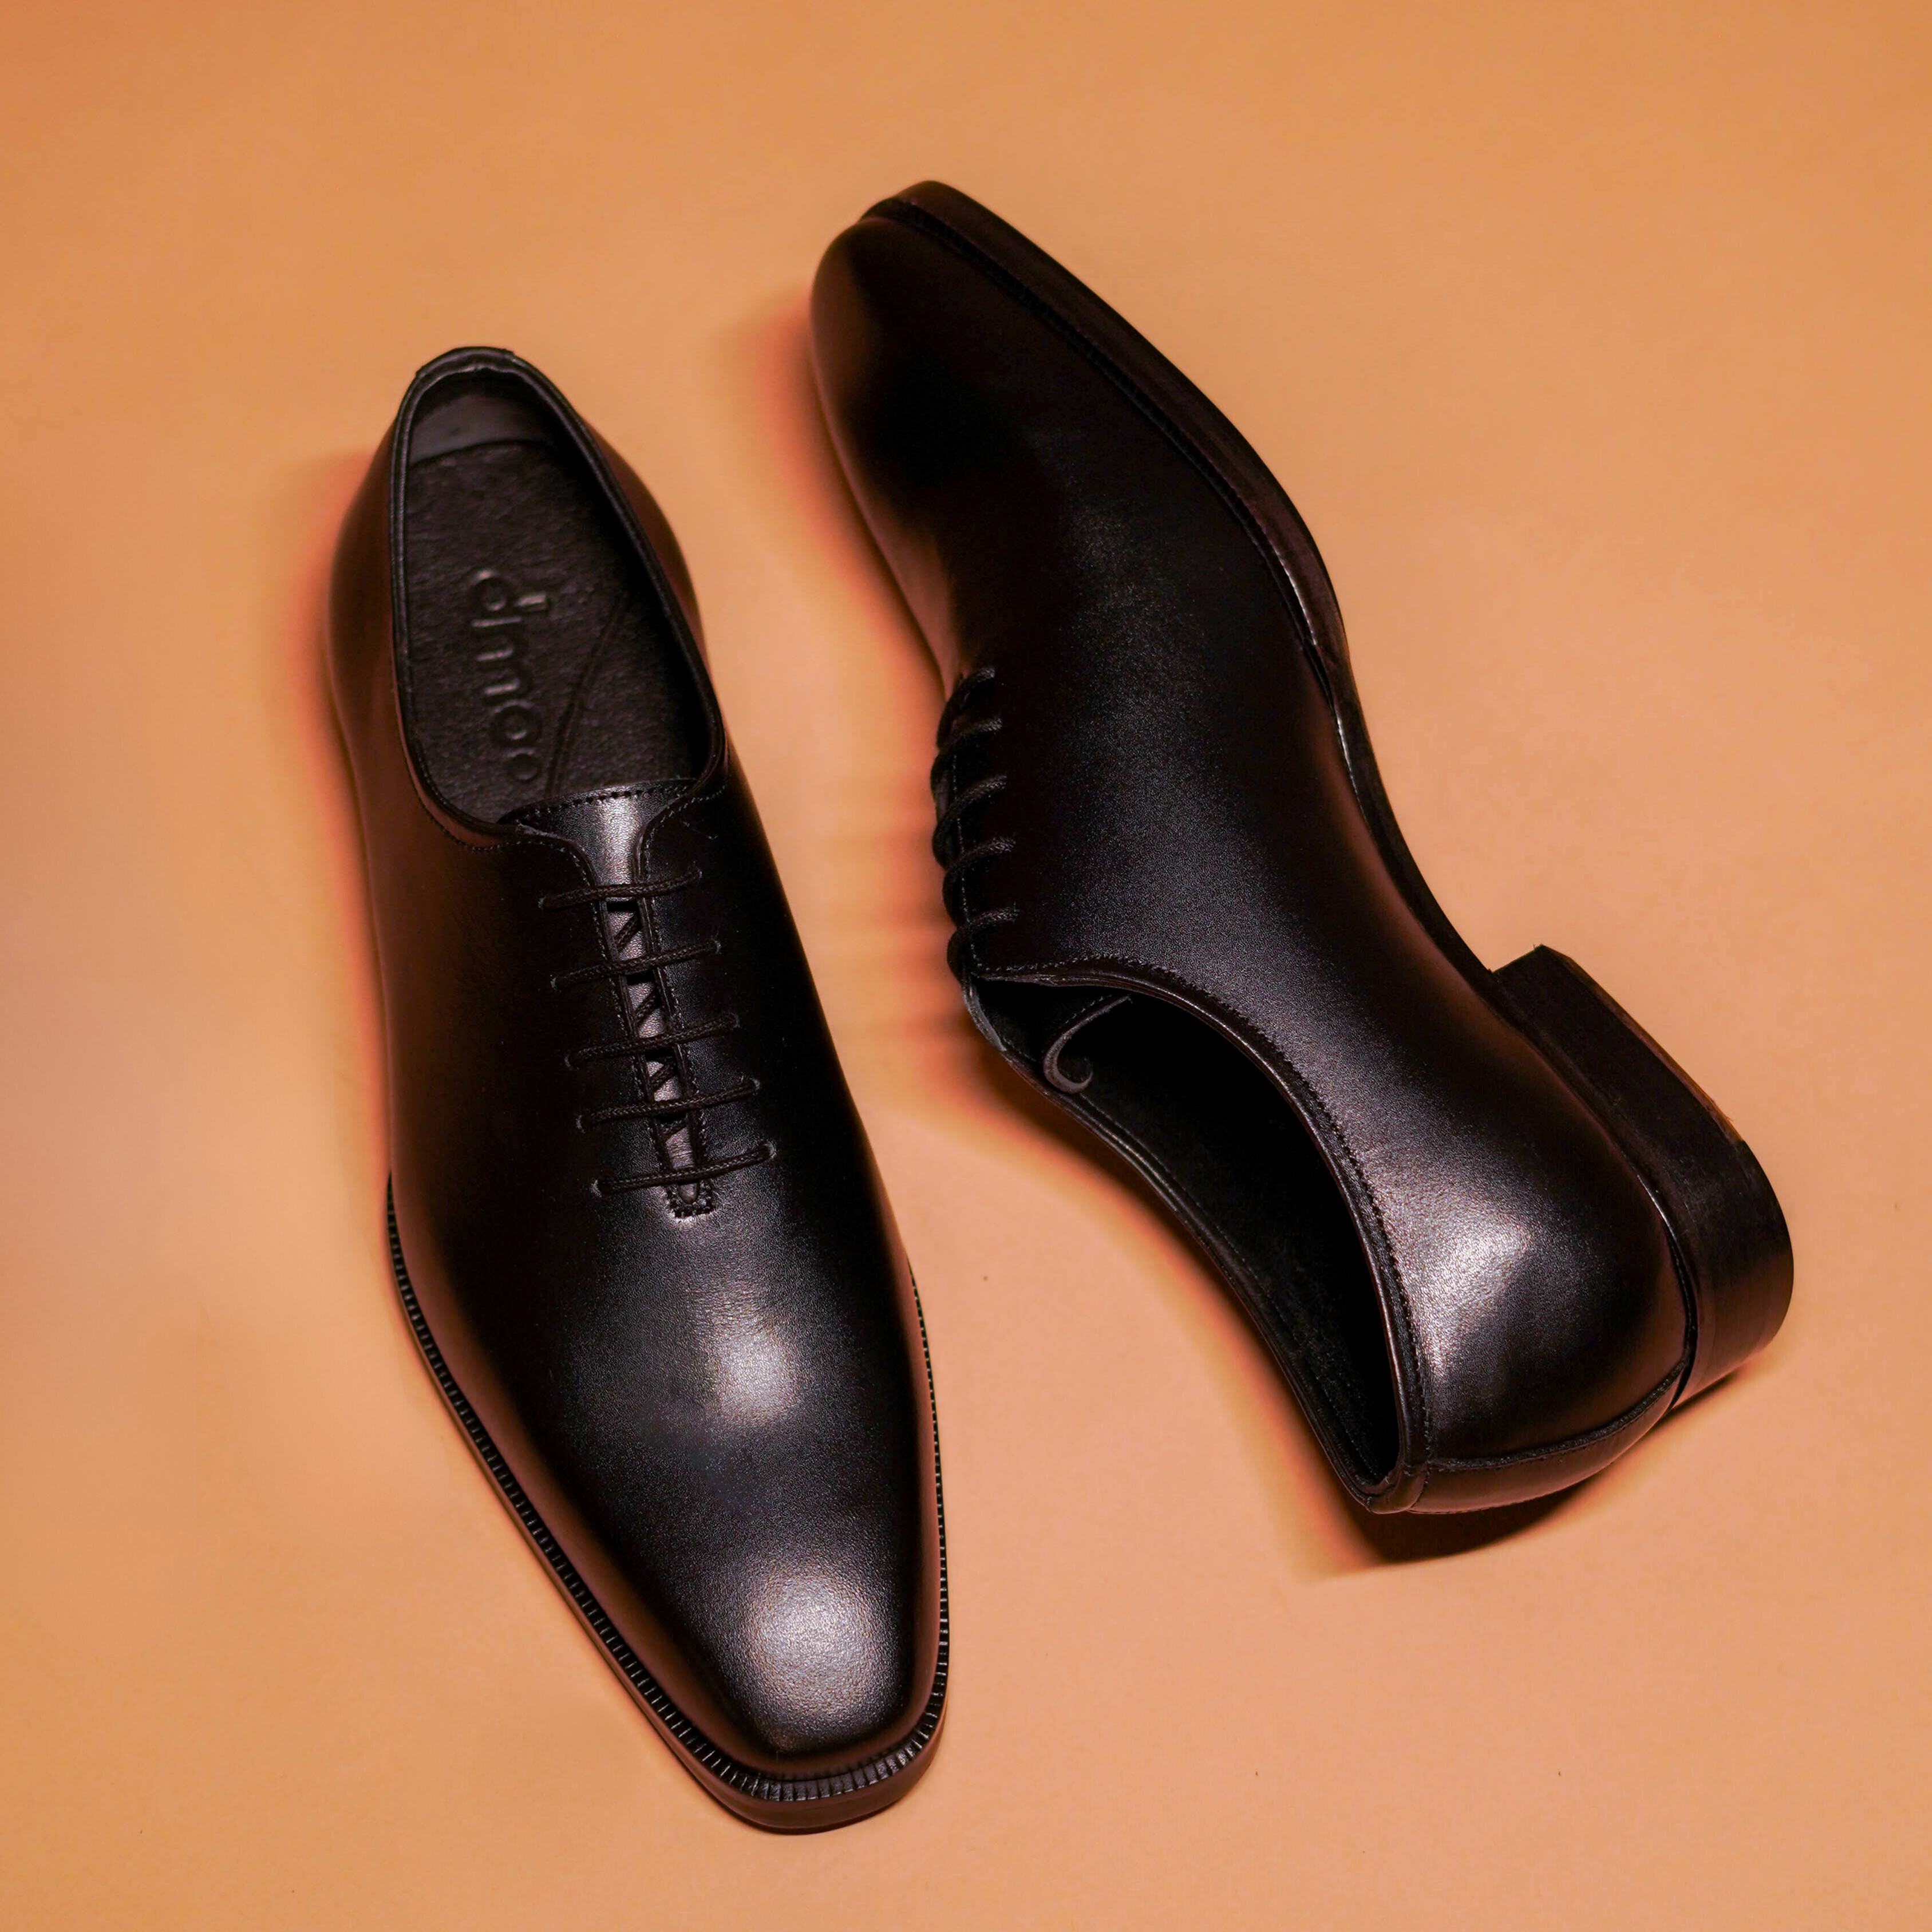 dmodot Belismo Nero in exquisite black leather, luxury hole cut Oxford with modern square toe.